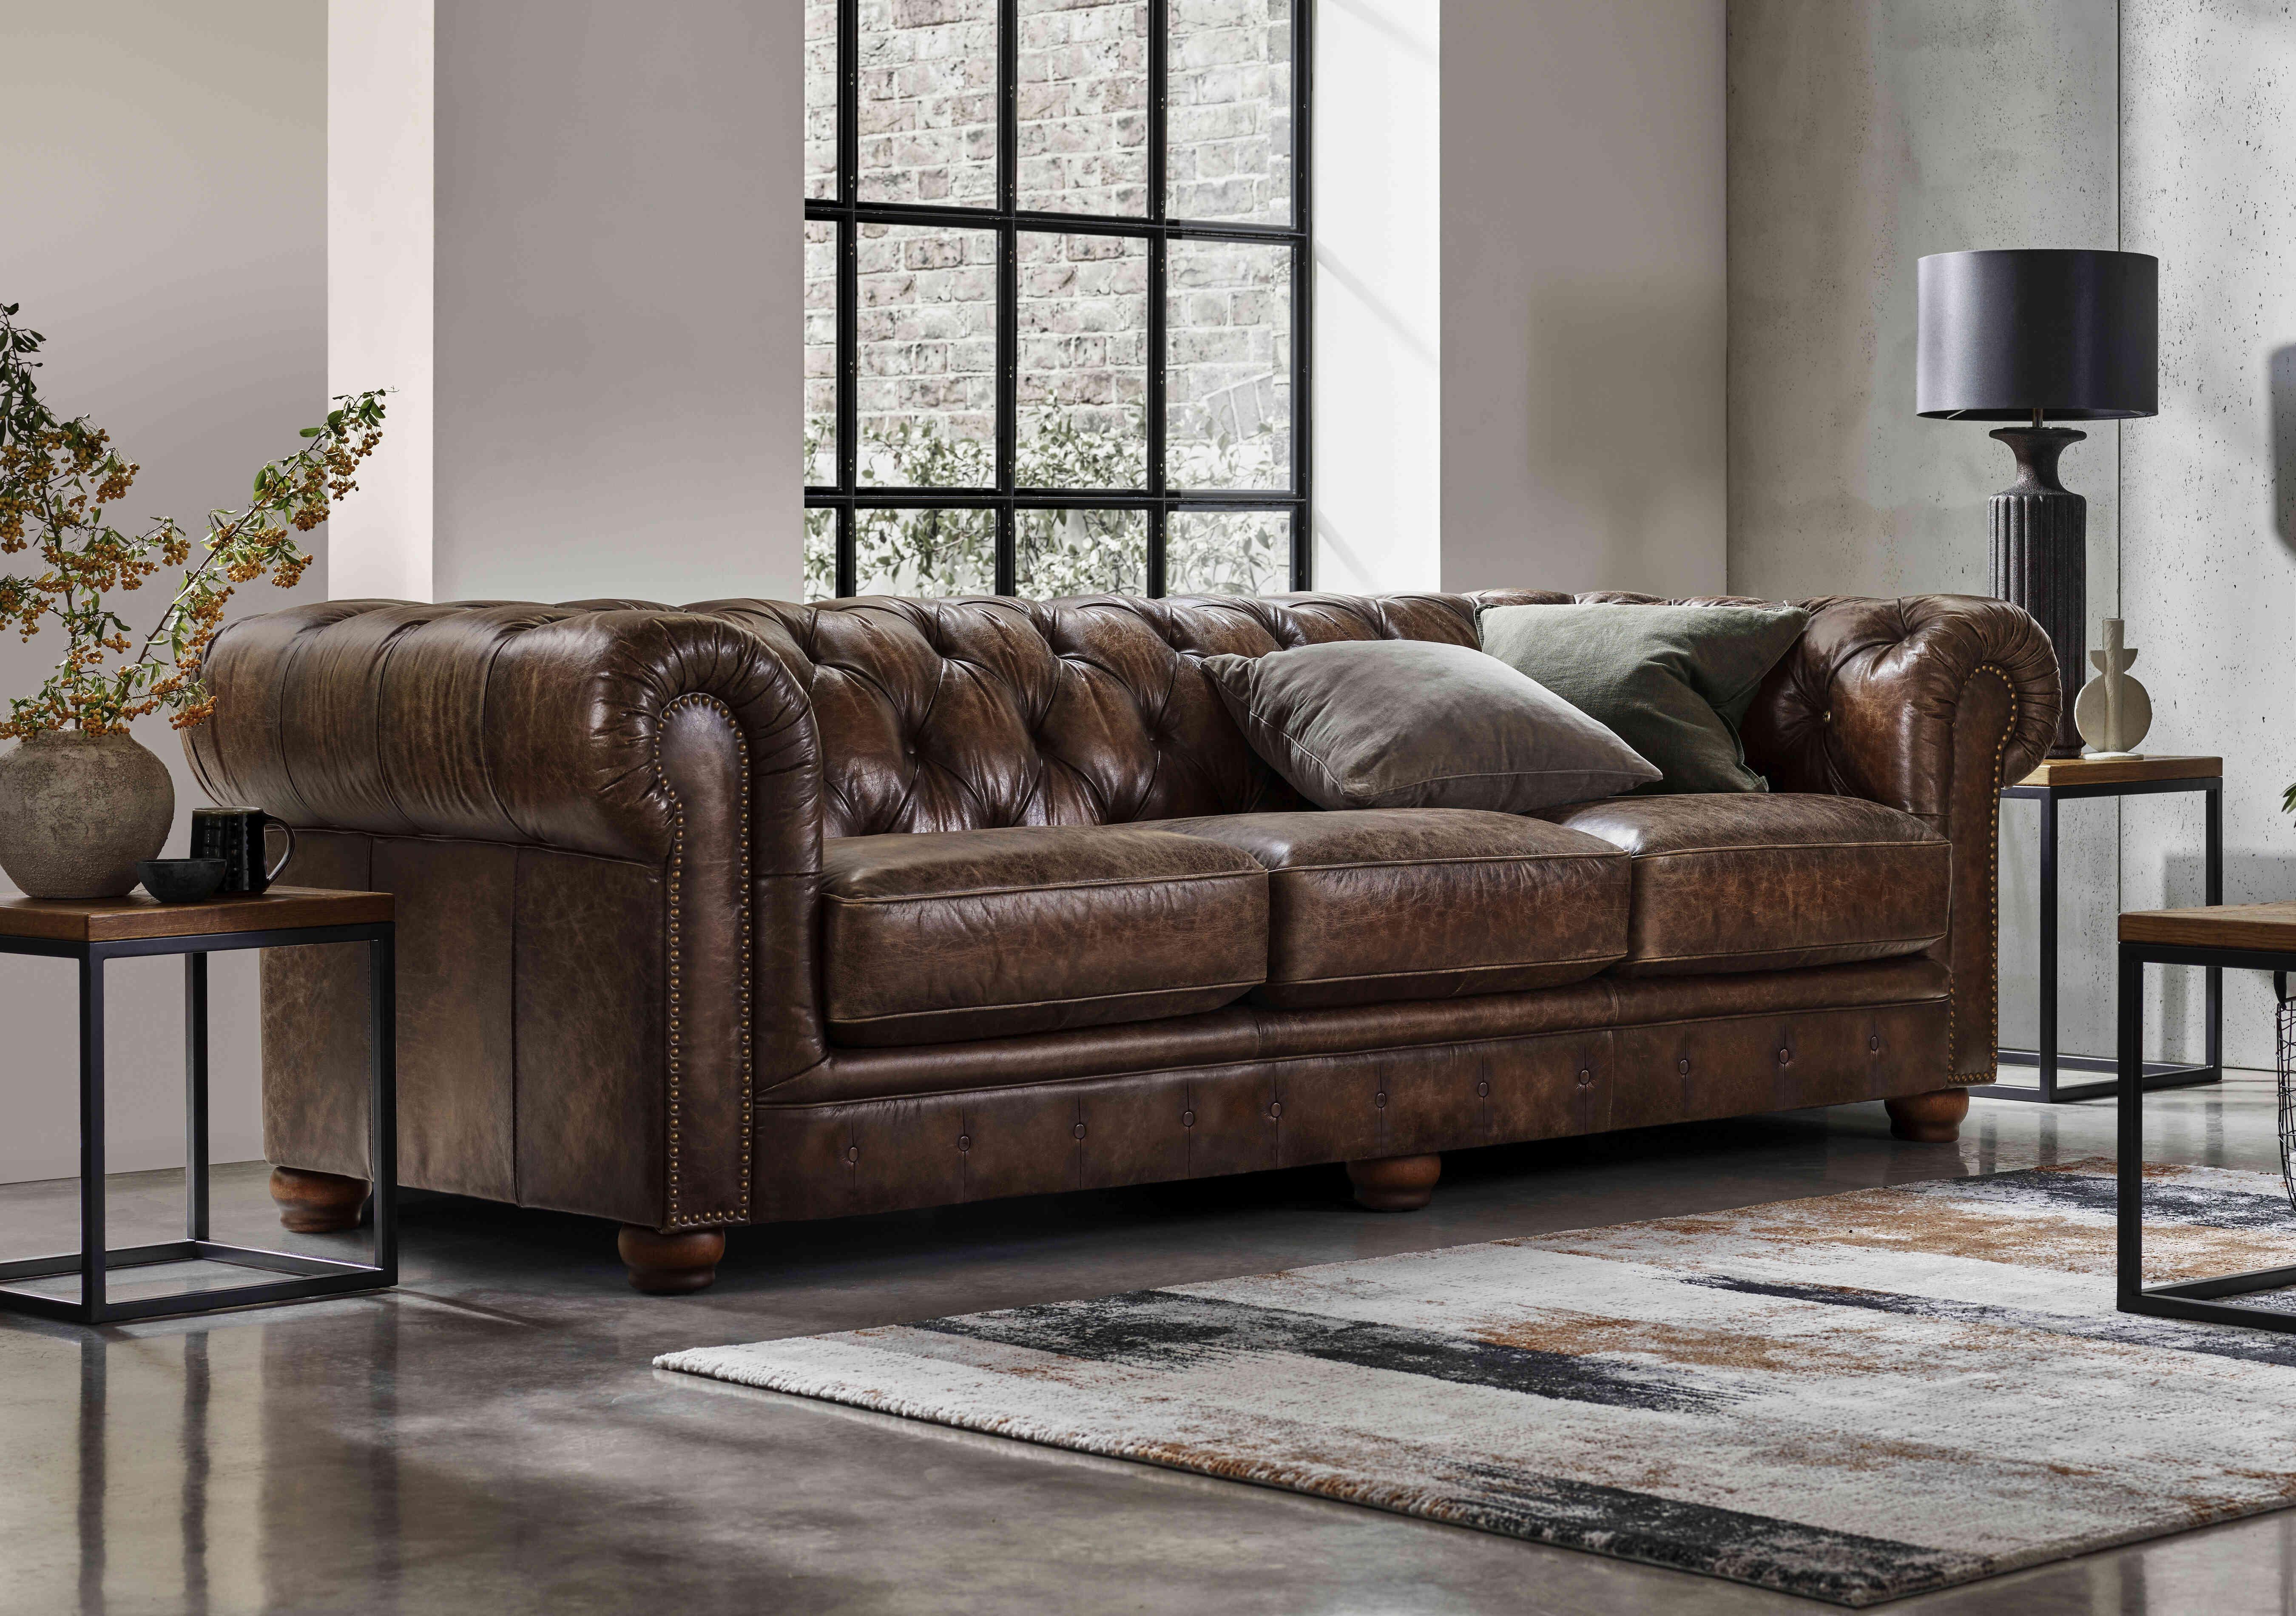 Shackleton 4 Seater Leather Chesterfield Sofa with USB-C in  on Furniture Village